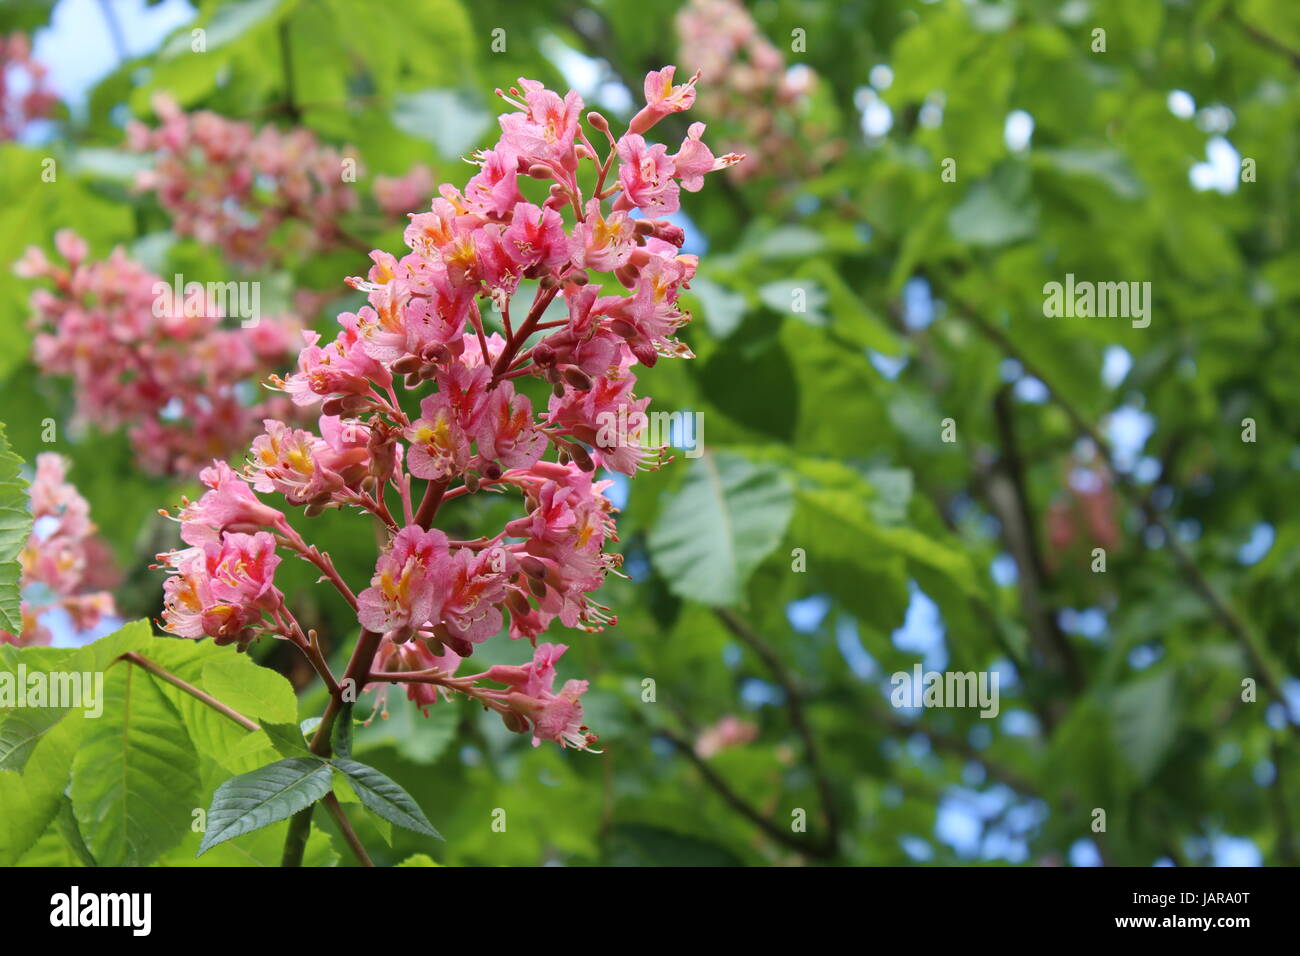 Pink Horse Chestnut Tree Blossoms Stock Photo